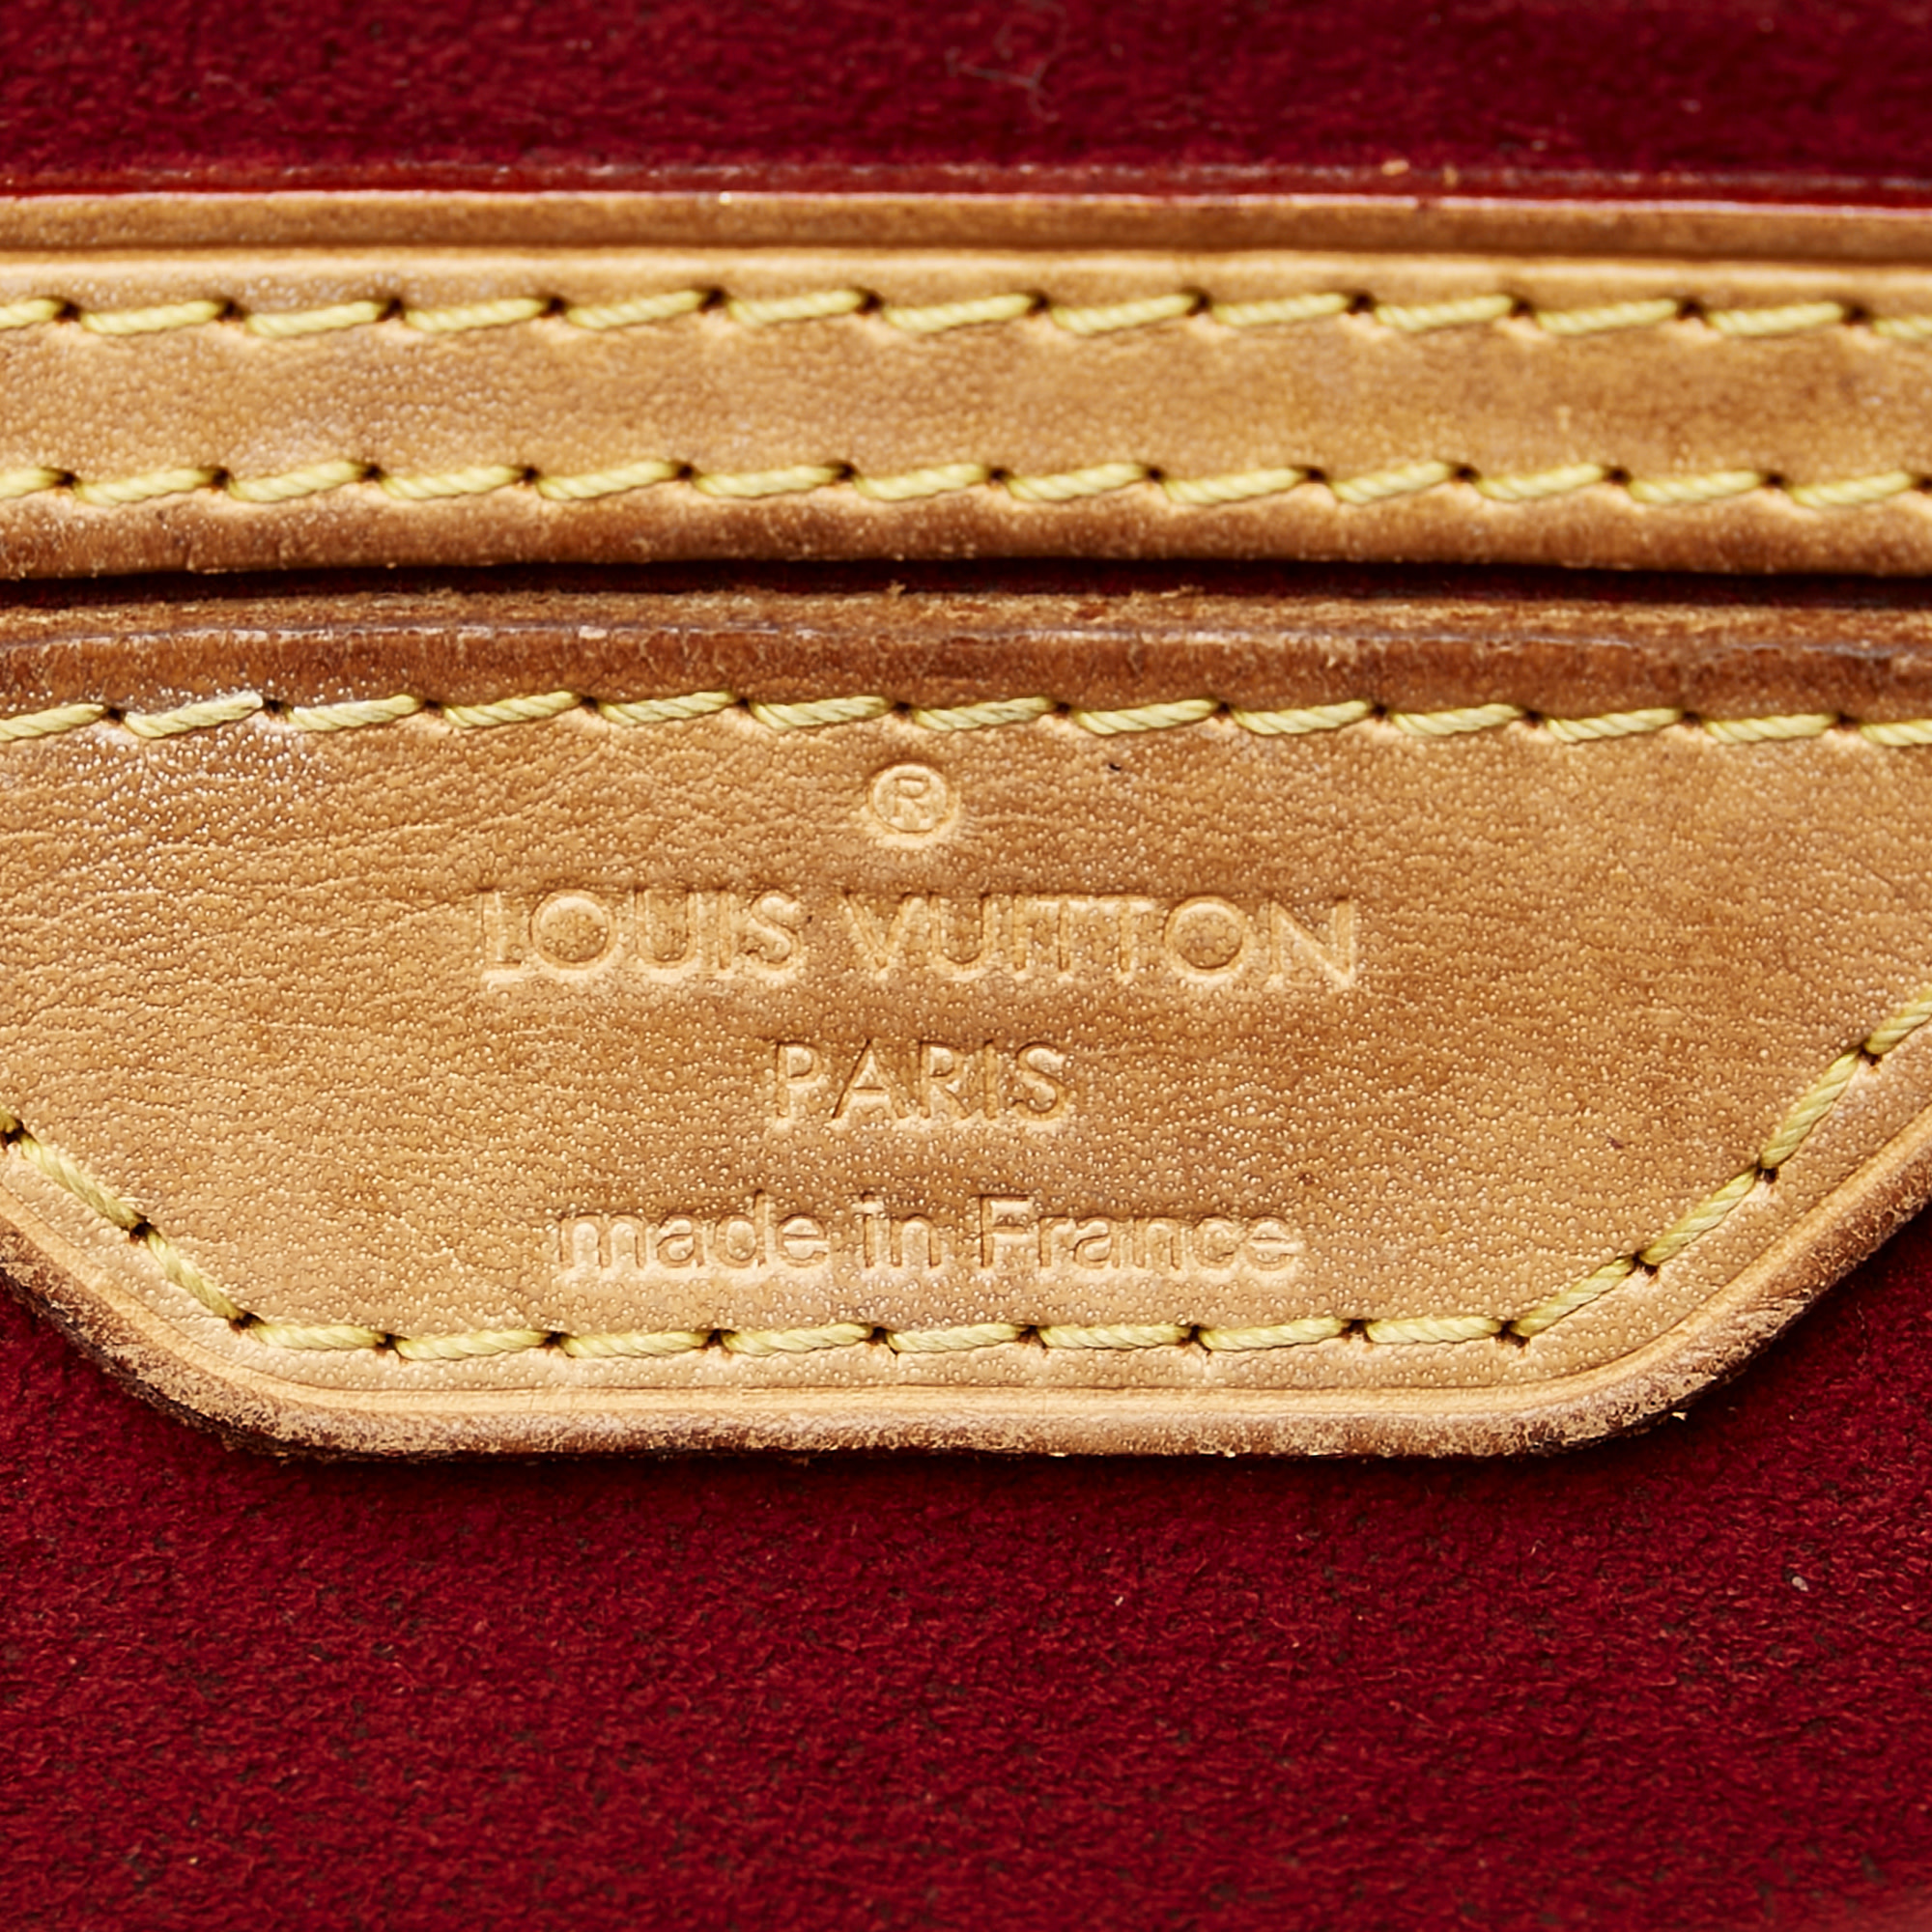 louis vuitton made in usa tag